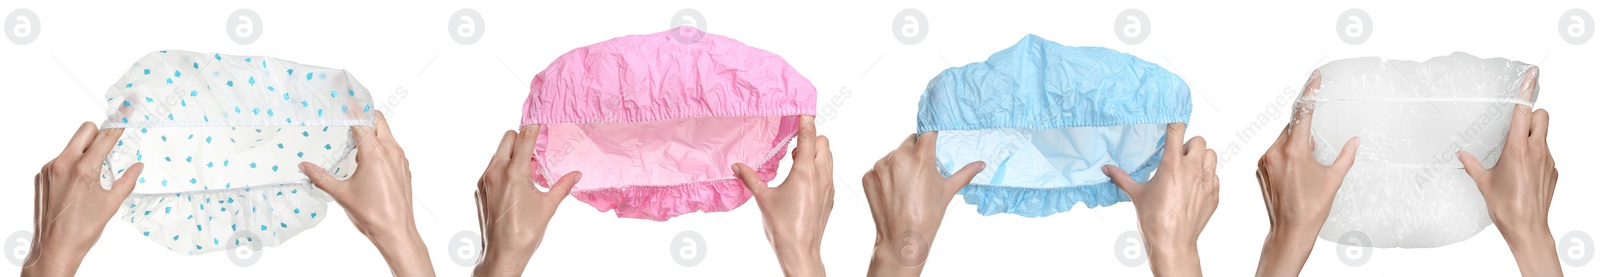 Image of Collage with photos of women holding different shower caps on white background, closeup. Banner design